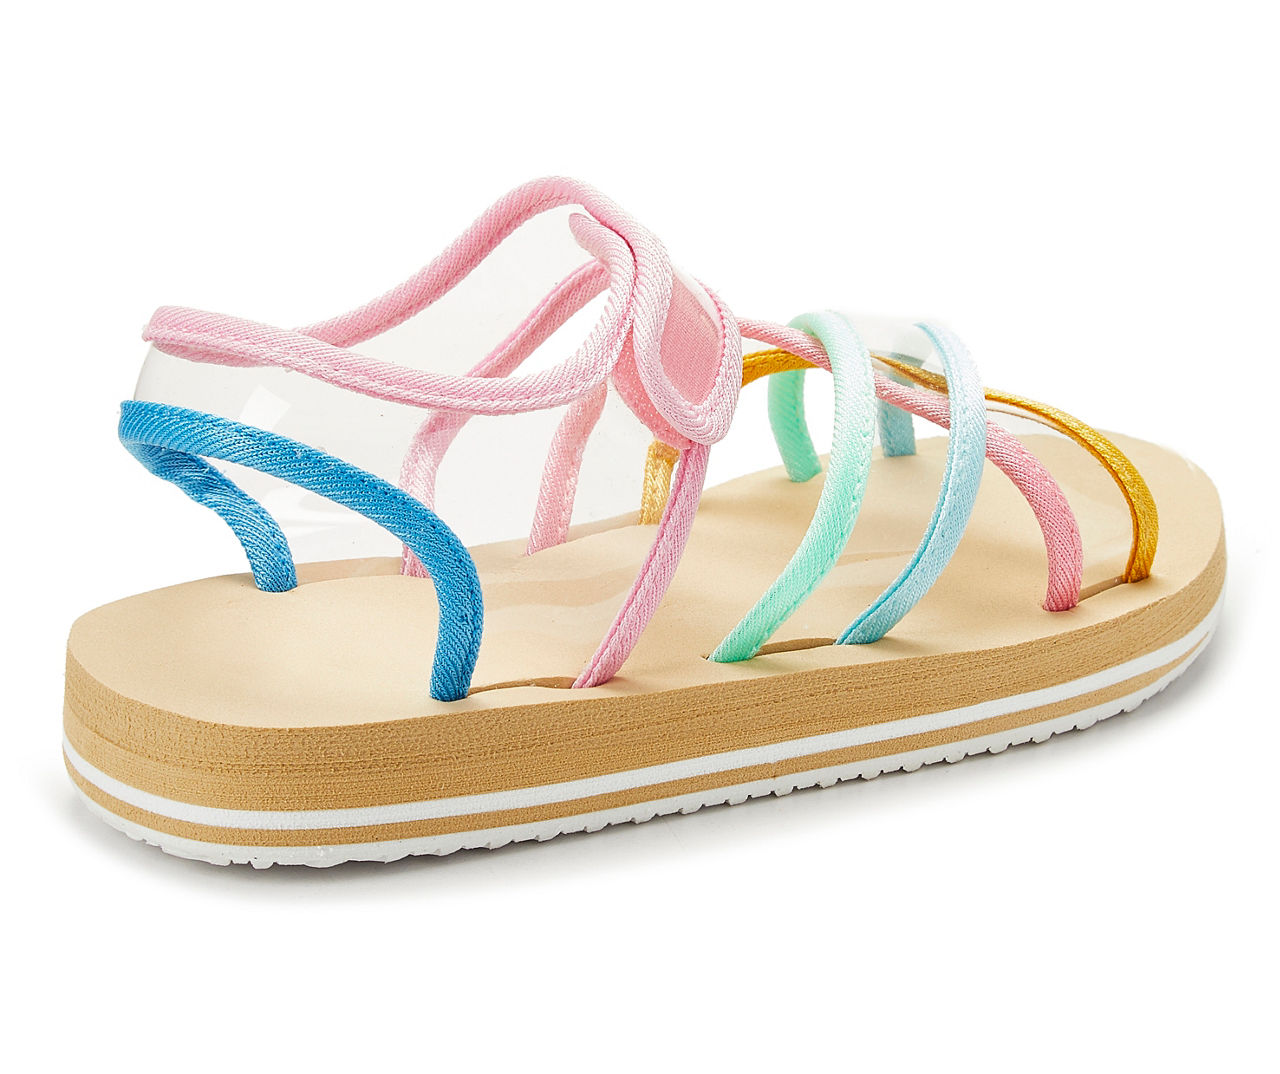 YOUTH GIRL CLEAR PASTEL SANDAL M